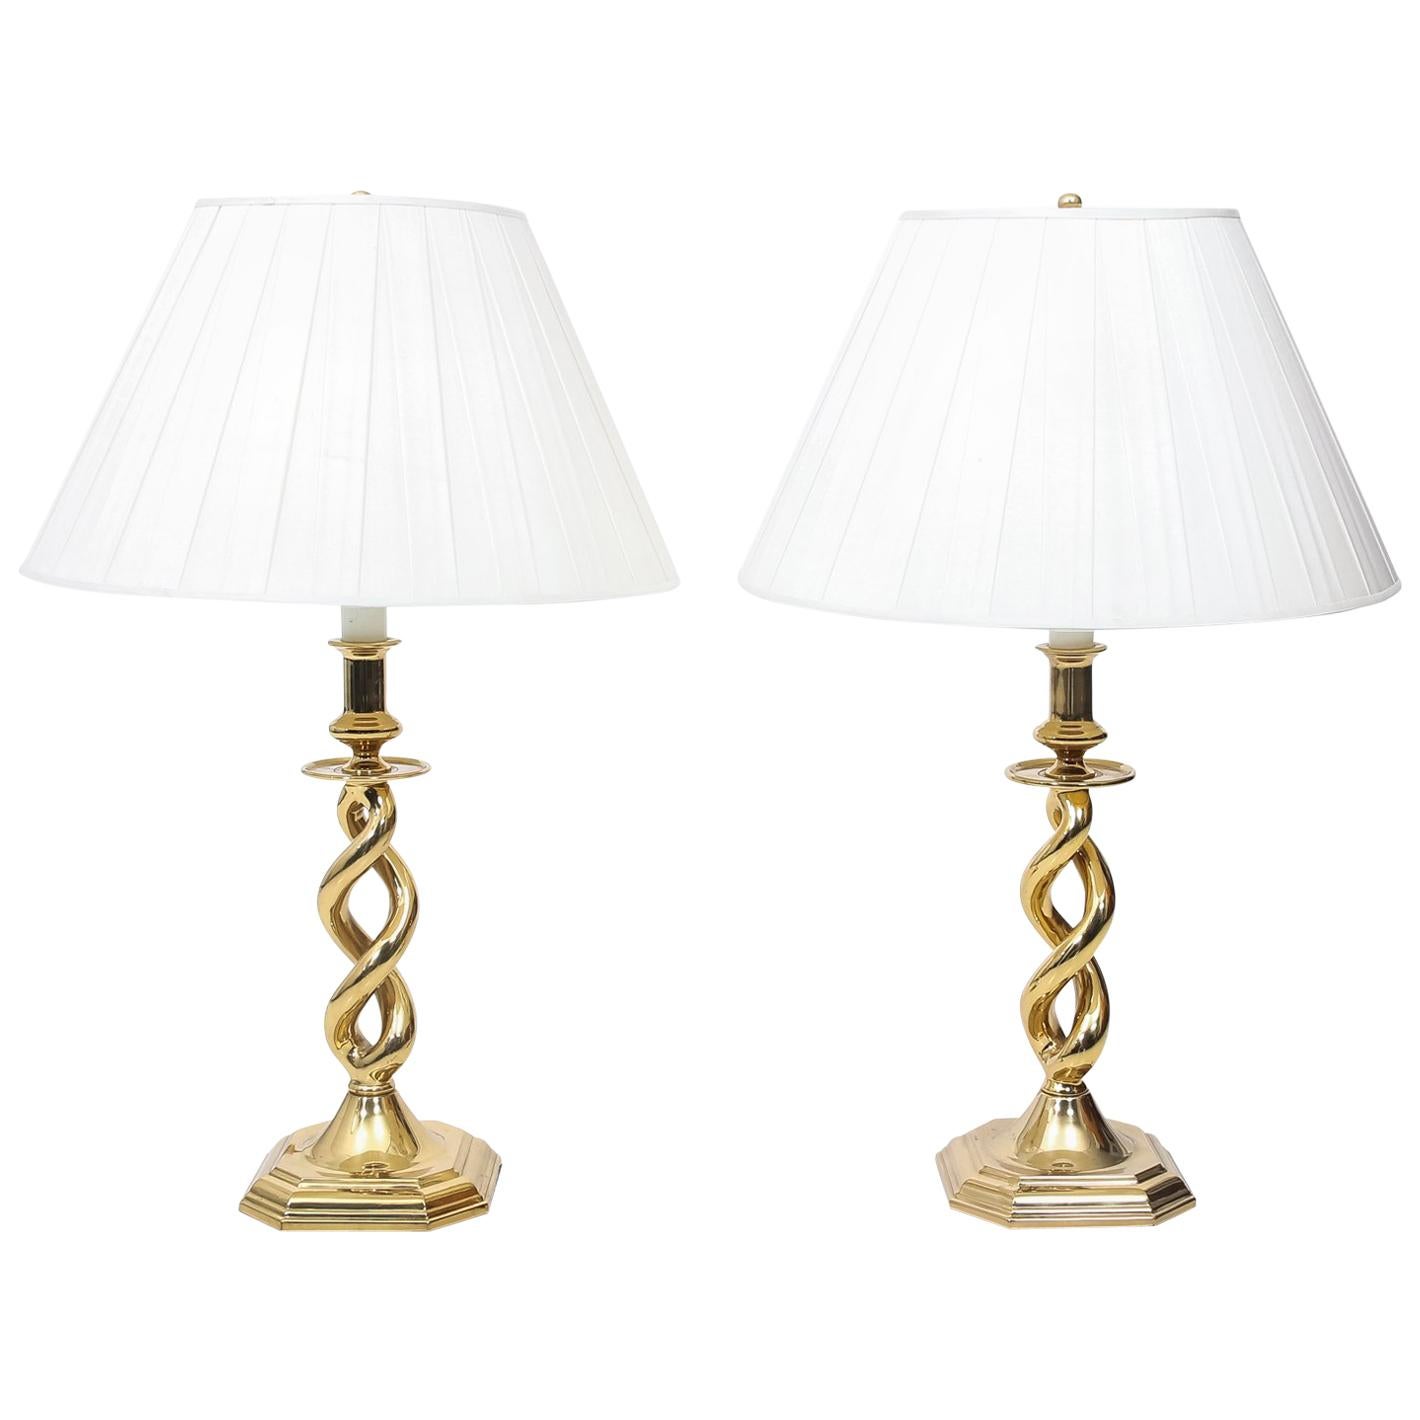 Pair of Brass Barley Twist Table Lamps